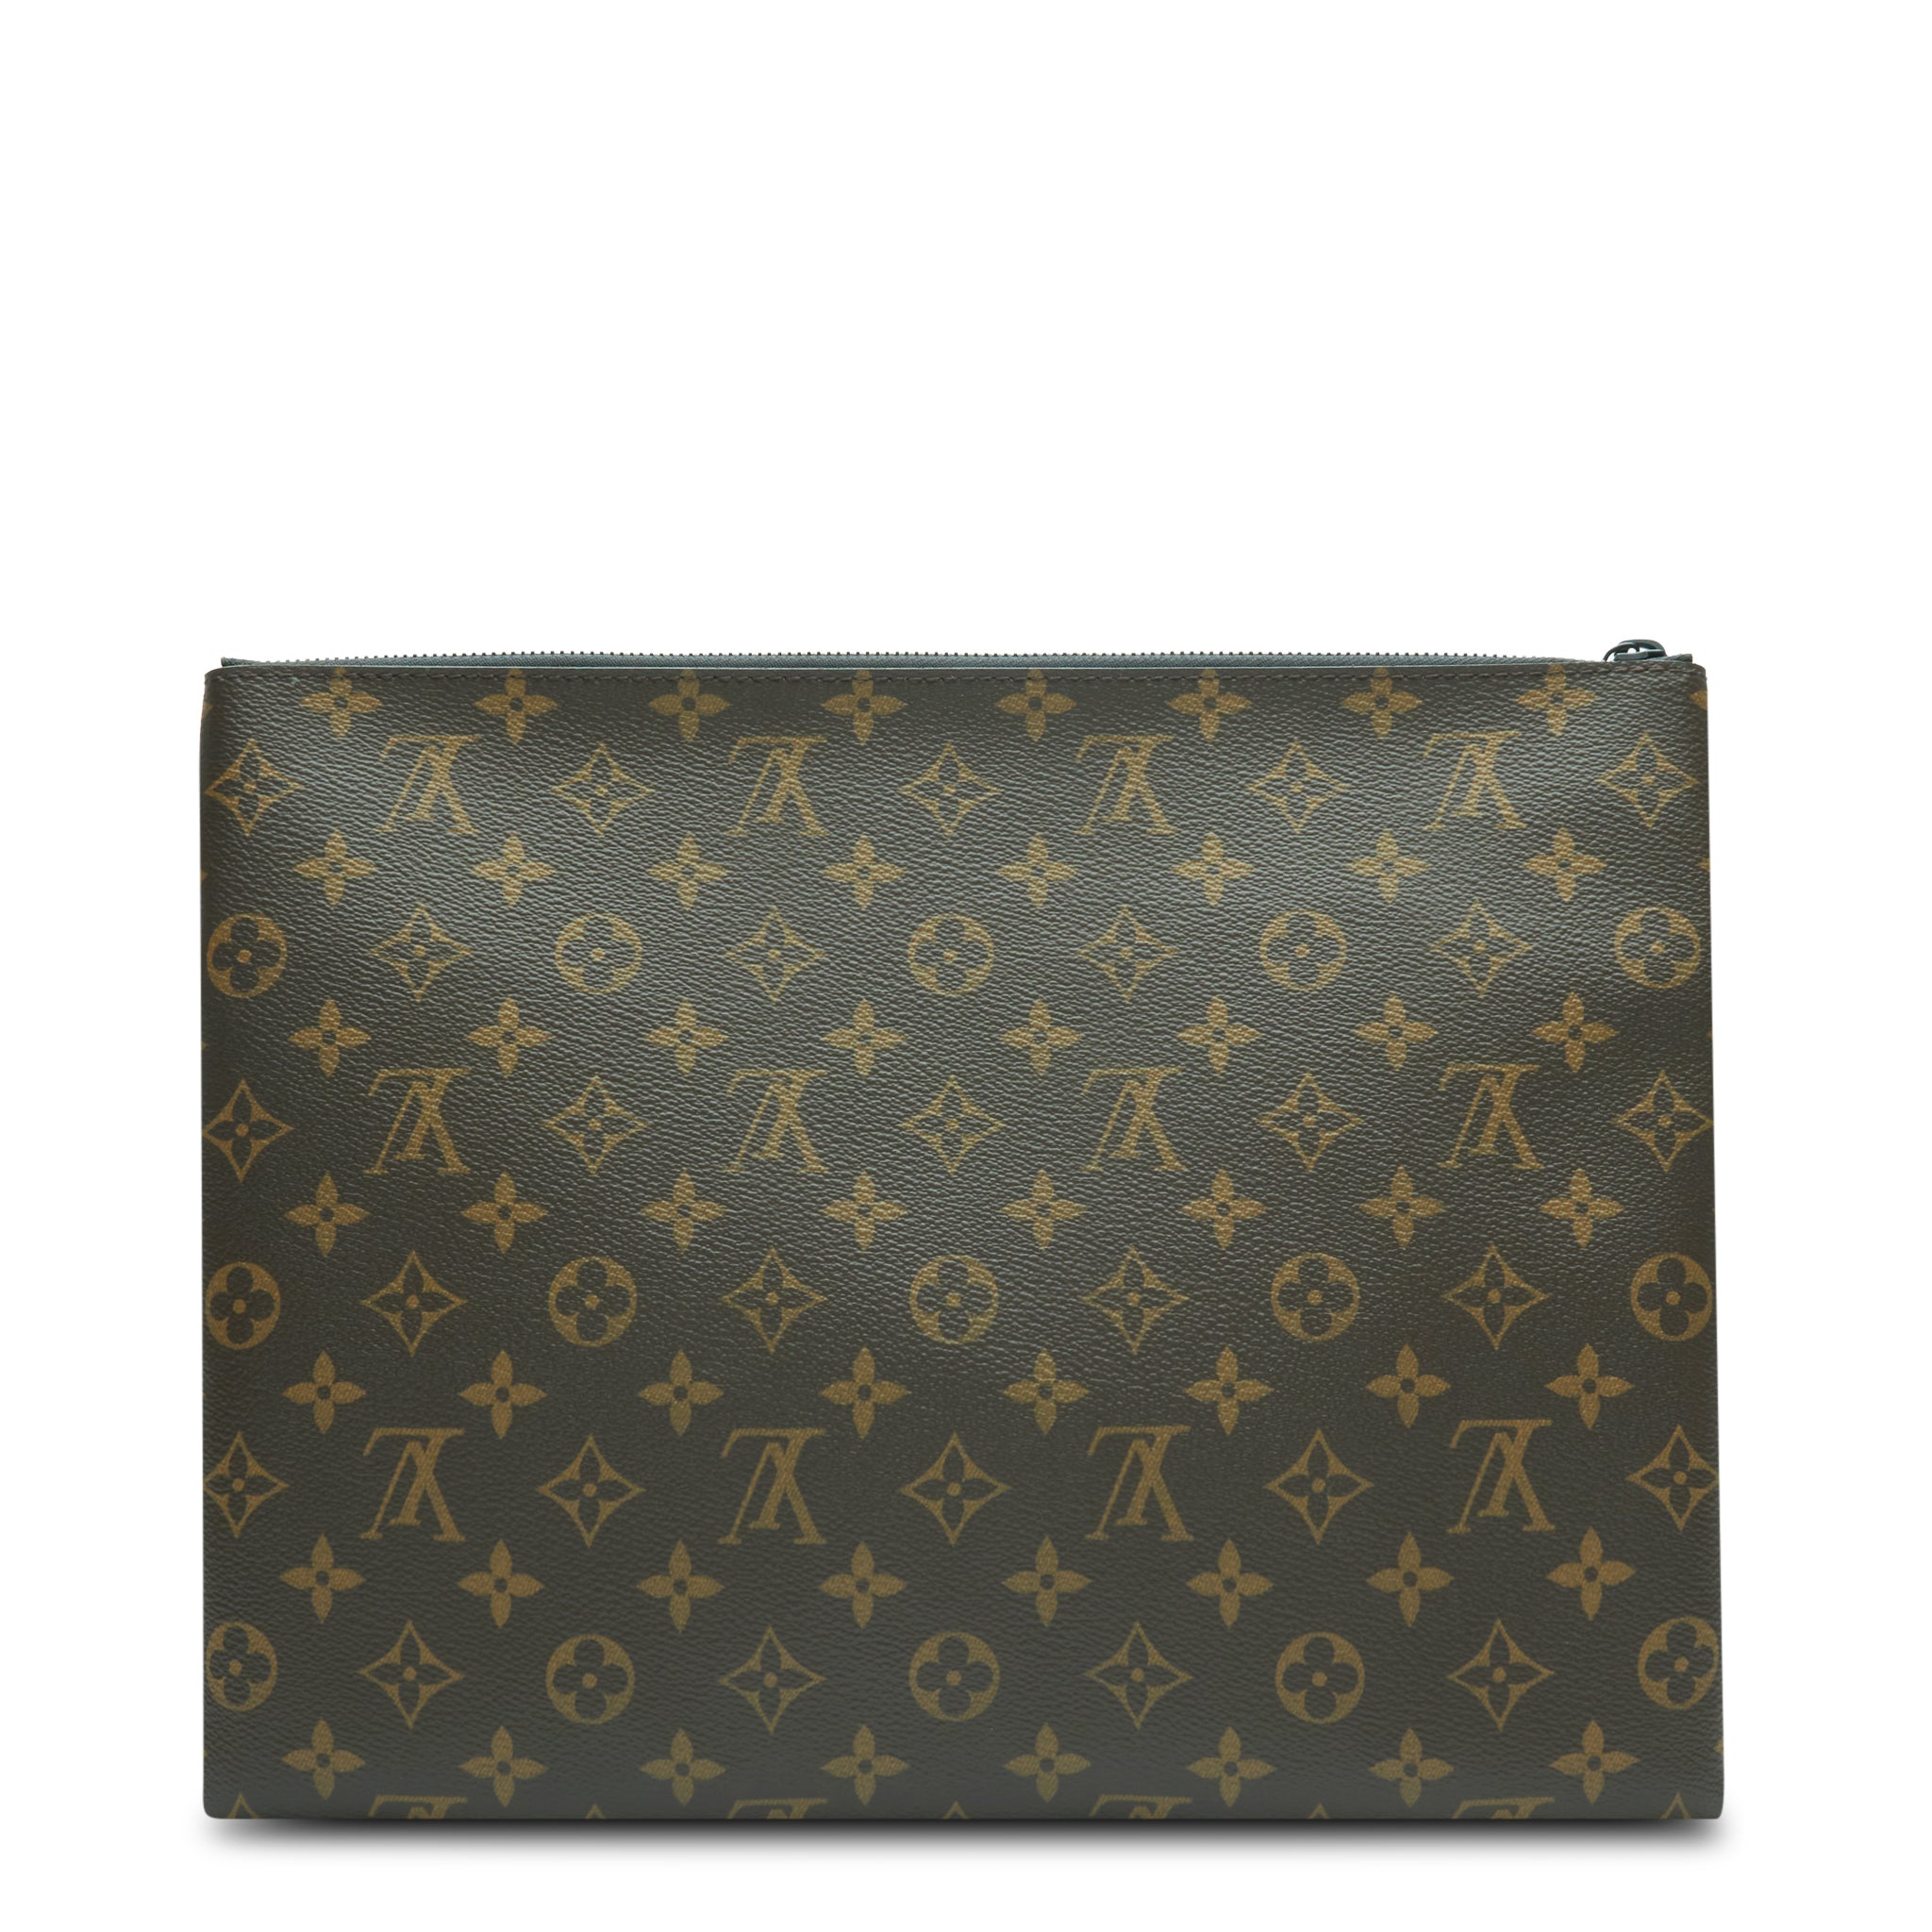 Back view of Louis Vuitton Monogram A4 Pouch Brown M44484